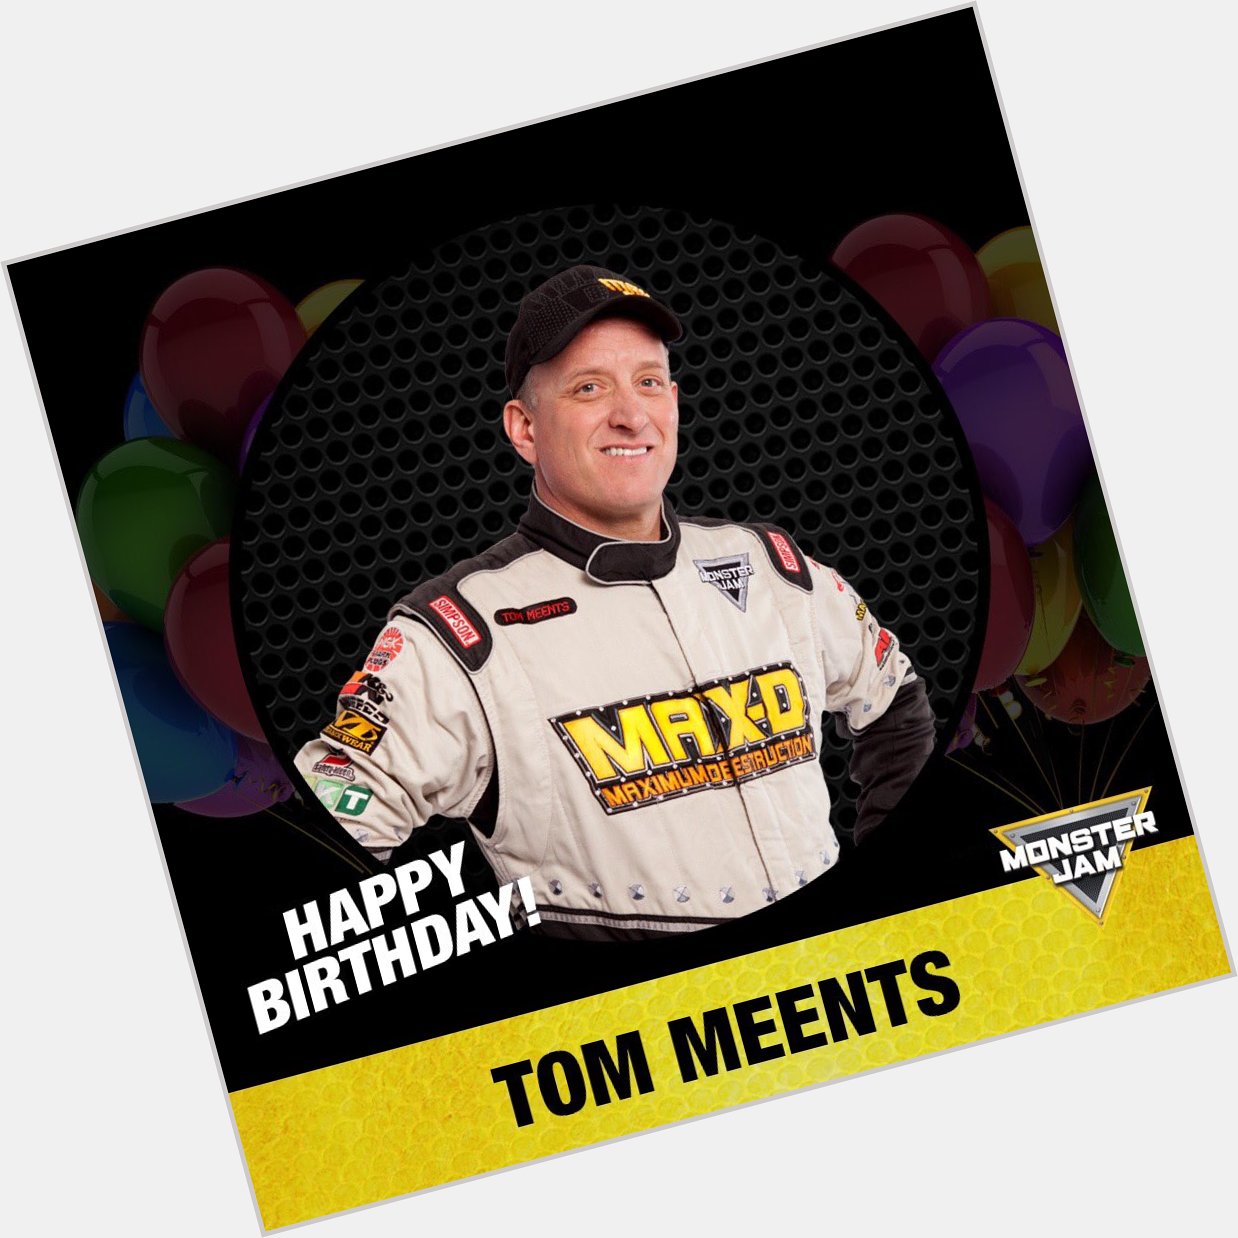 Everyone wish our 11-time World Champion, Tom Meents, a very Happy Birthday!   